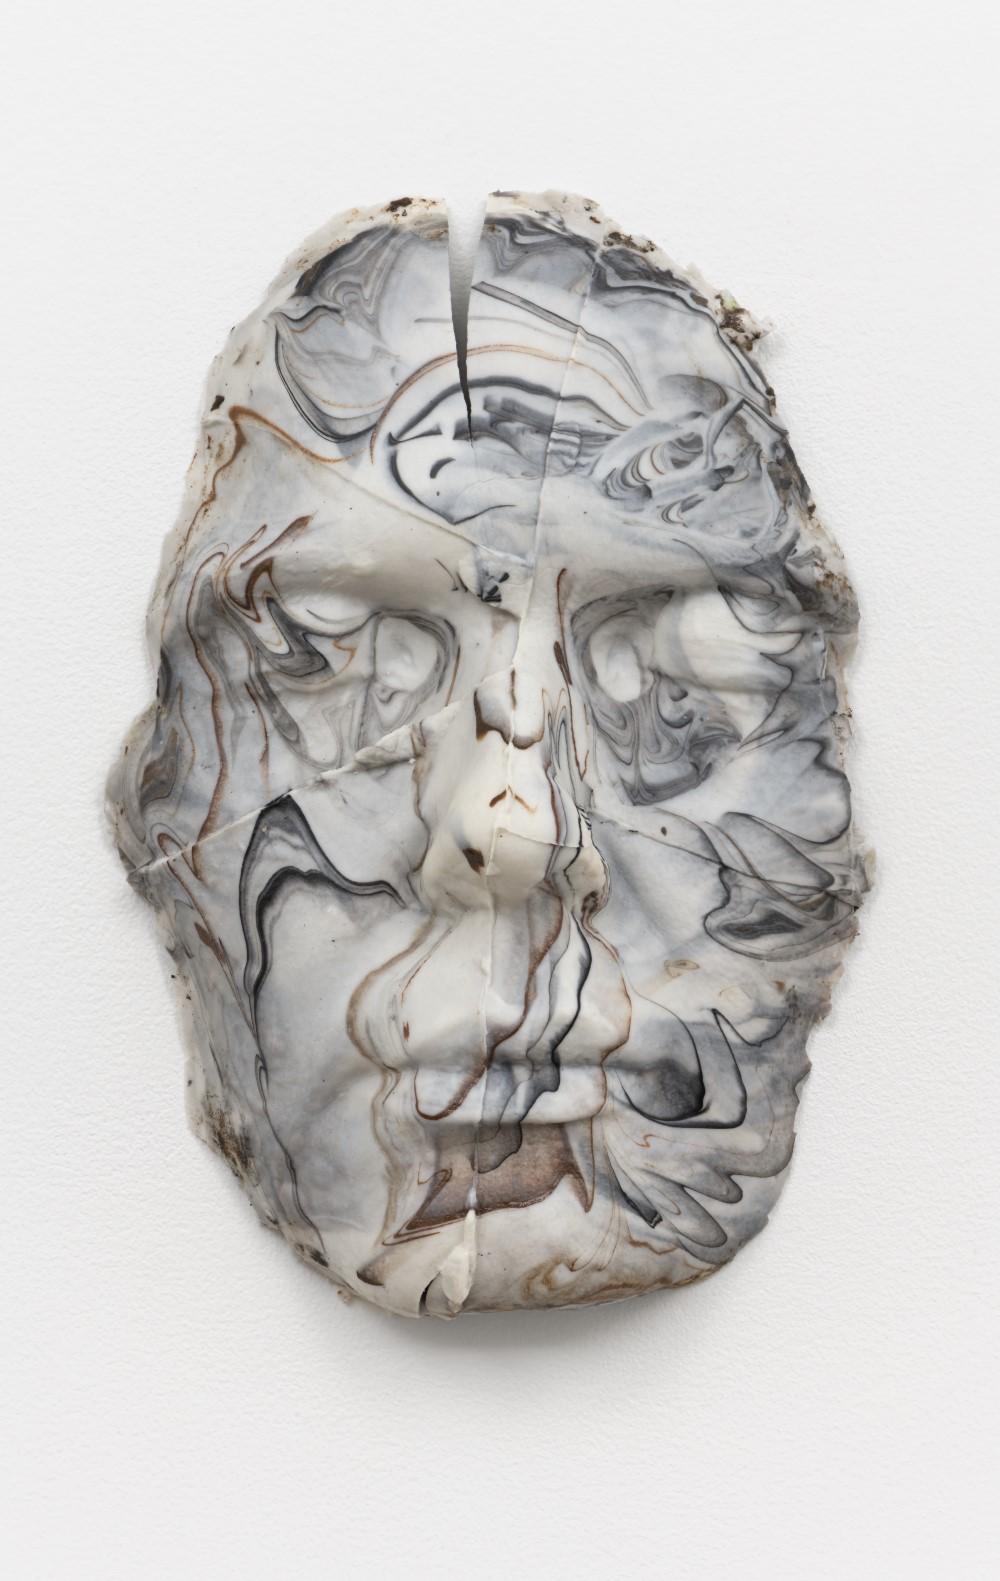 White, marbleized silicone sculpture of a face